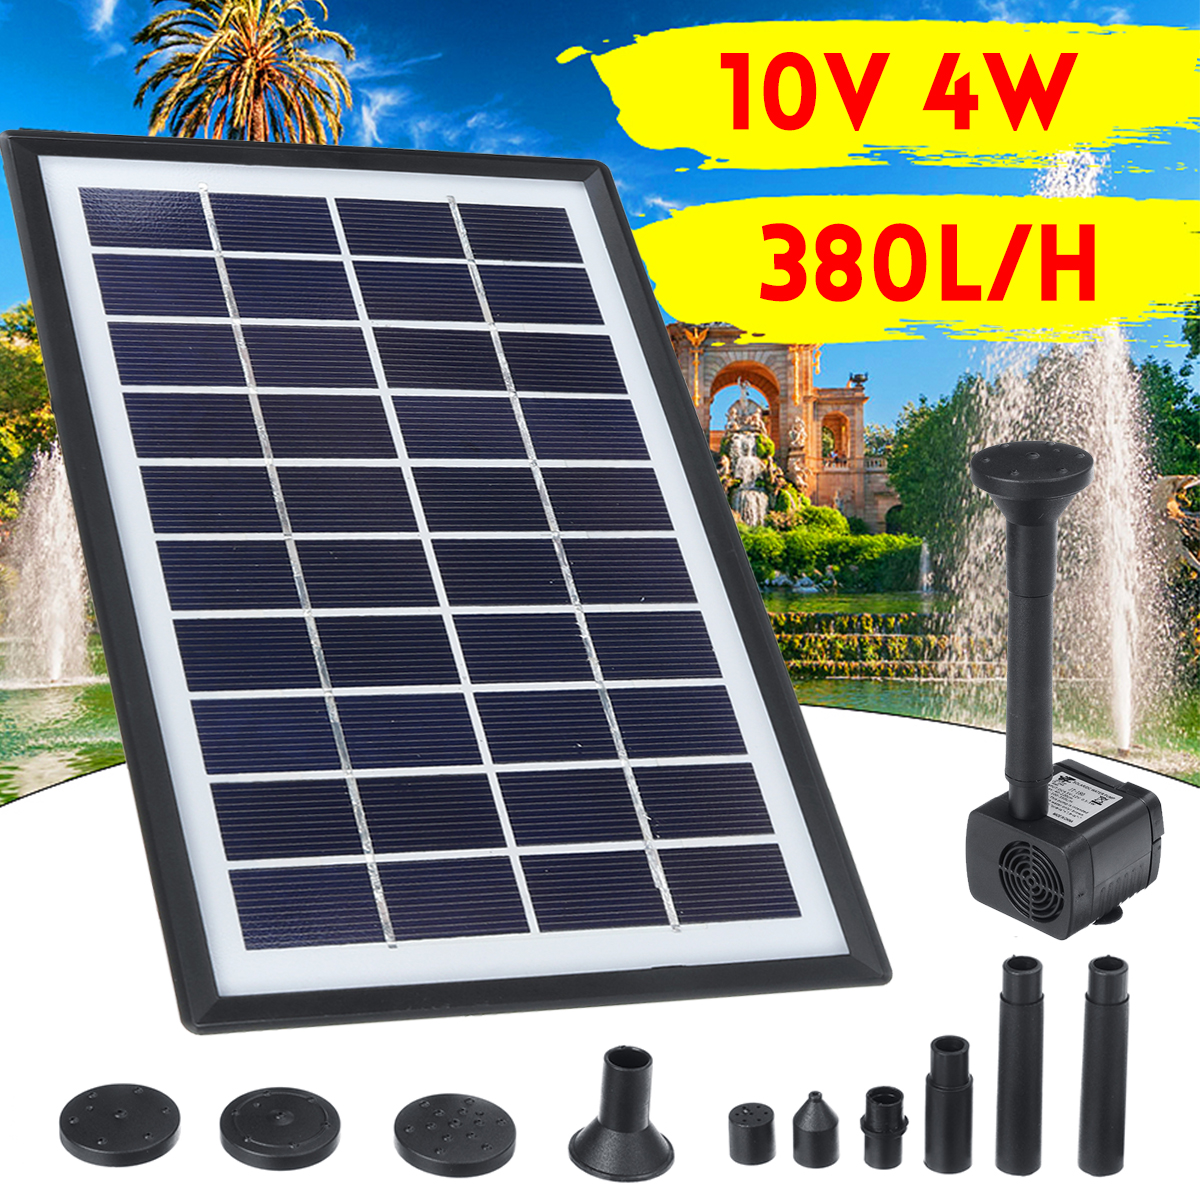 4W-10V-380LH-Solar-Panel-Water-Pump-Landscape-Pond-Pool-Aquarium-Floating-Fountain-with-6-Nozzles-1543610-1